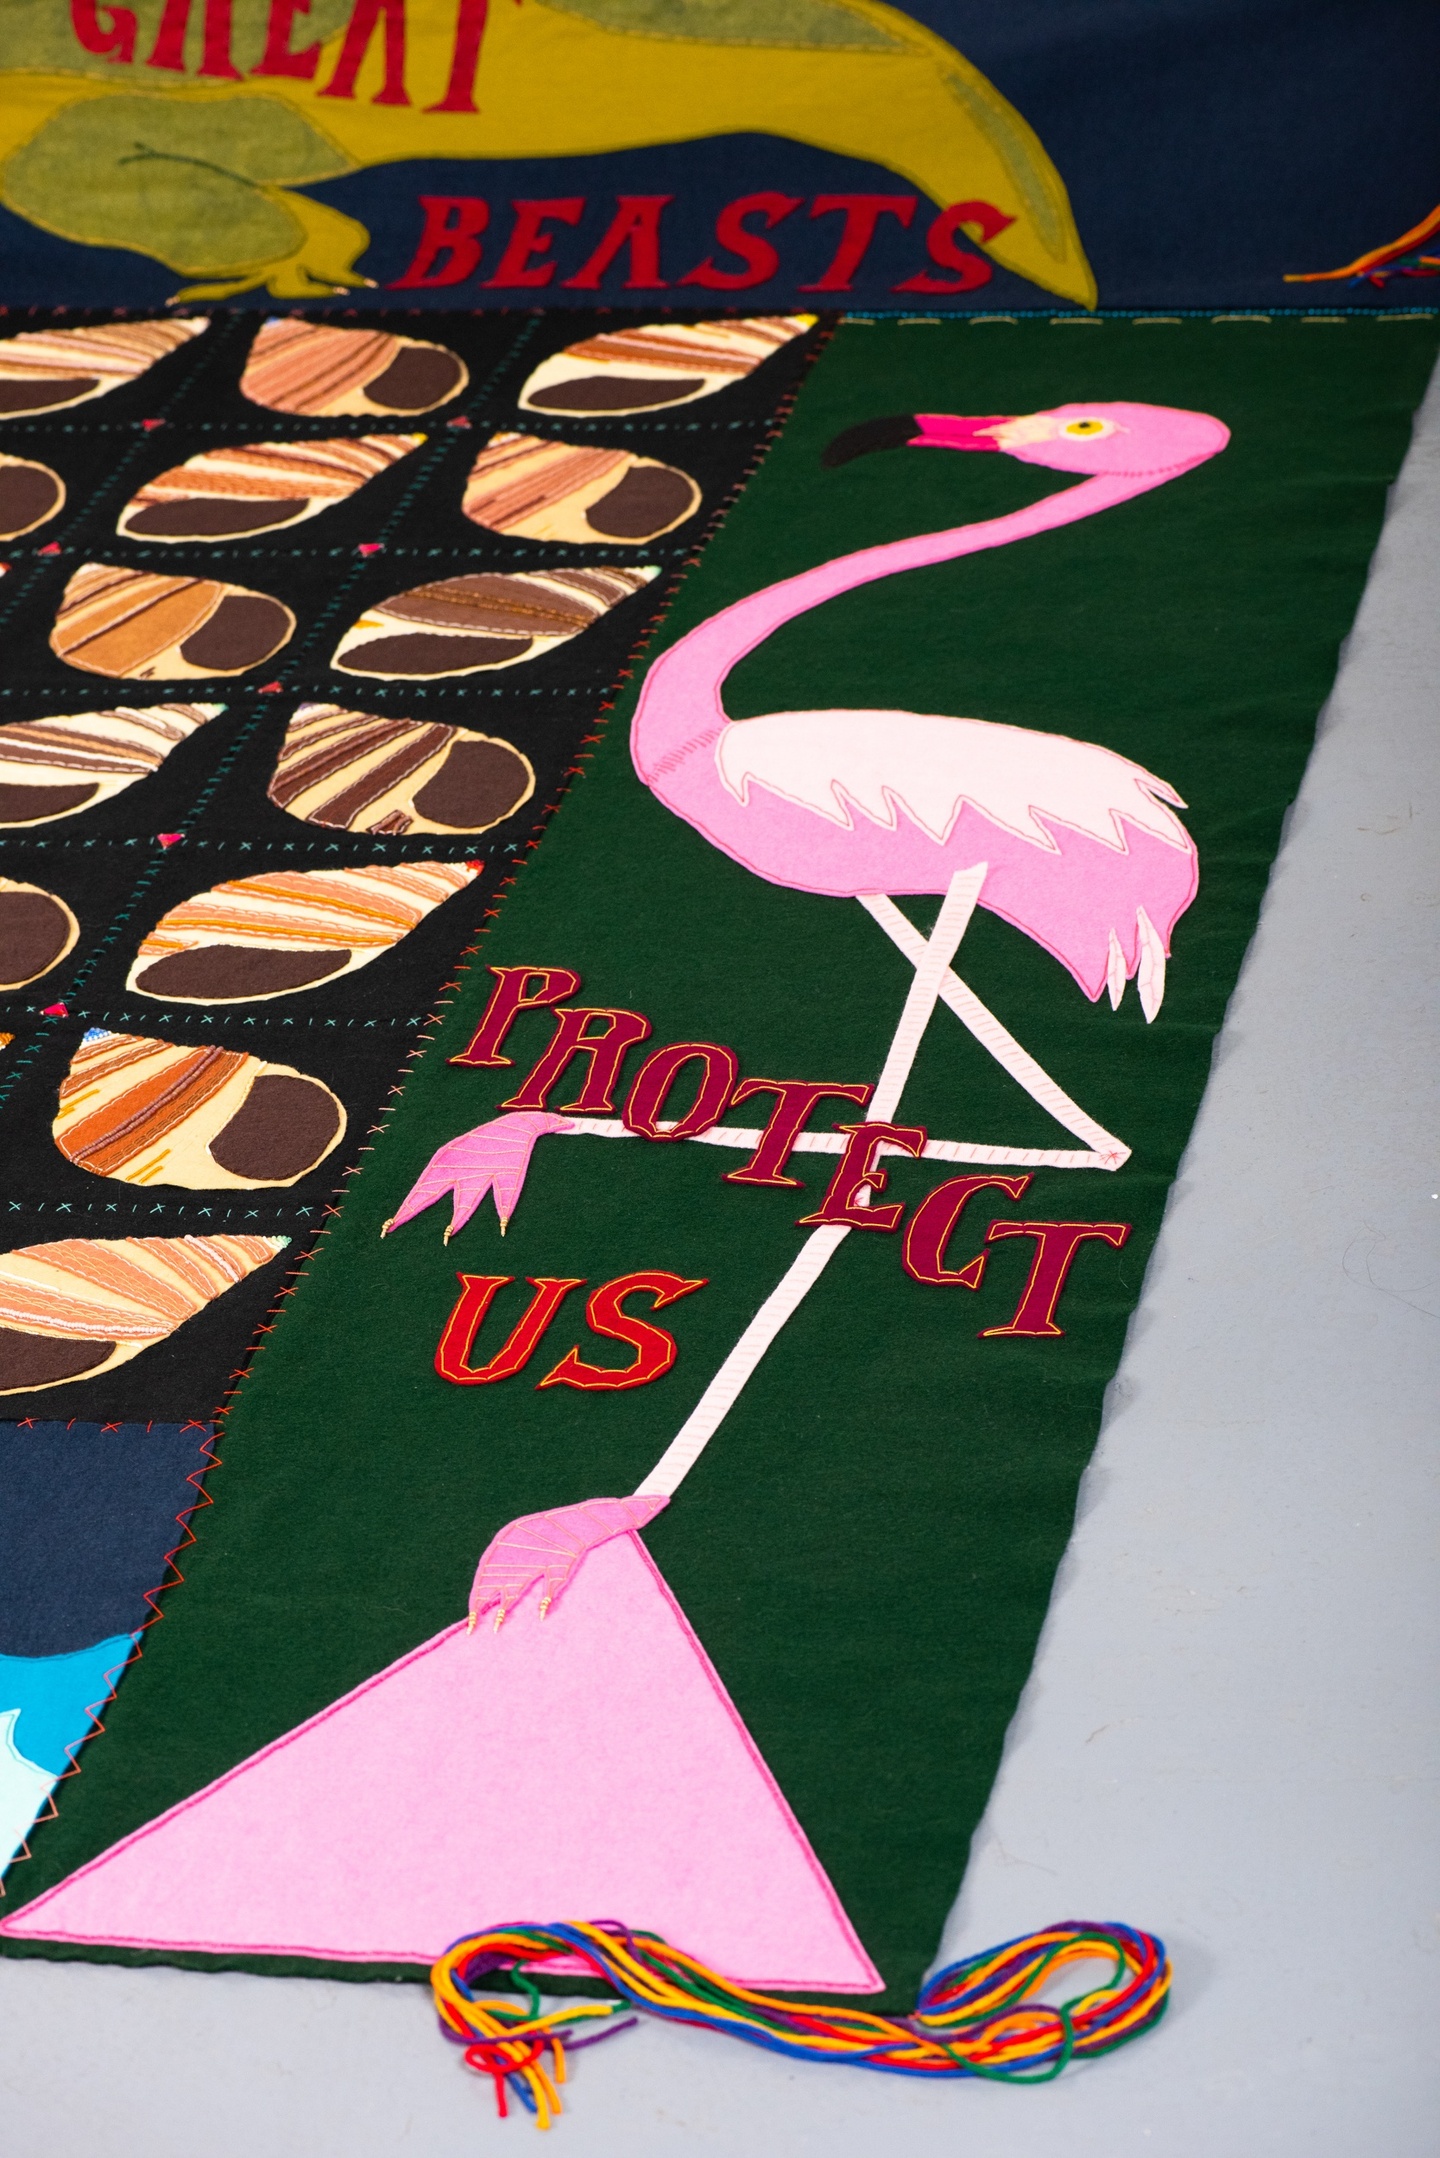 Detail of the bottom right corner of the quilt, which depicts a flamingo standing one-legged on top of a large pink triangle with the words "Protect Us" around it.